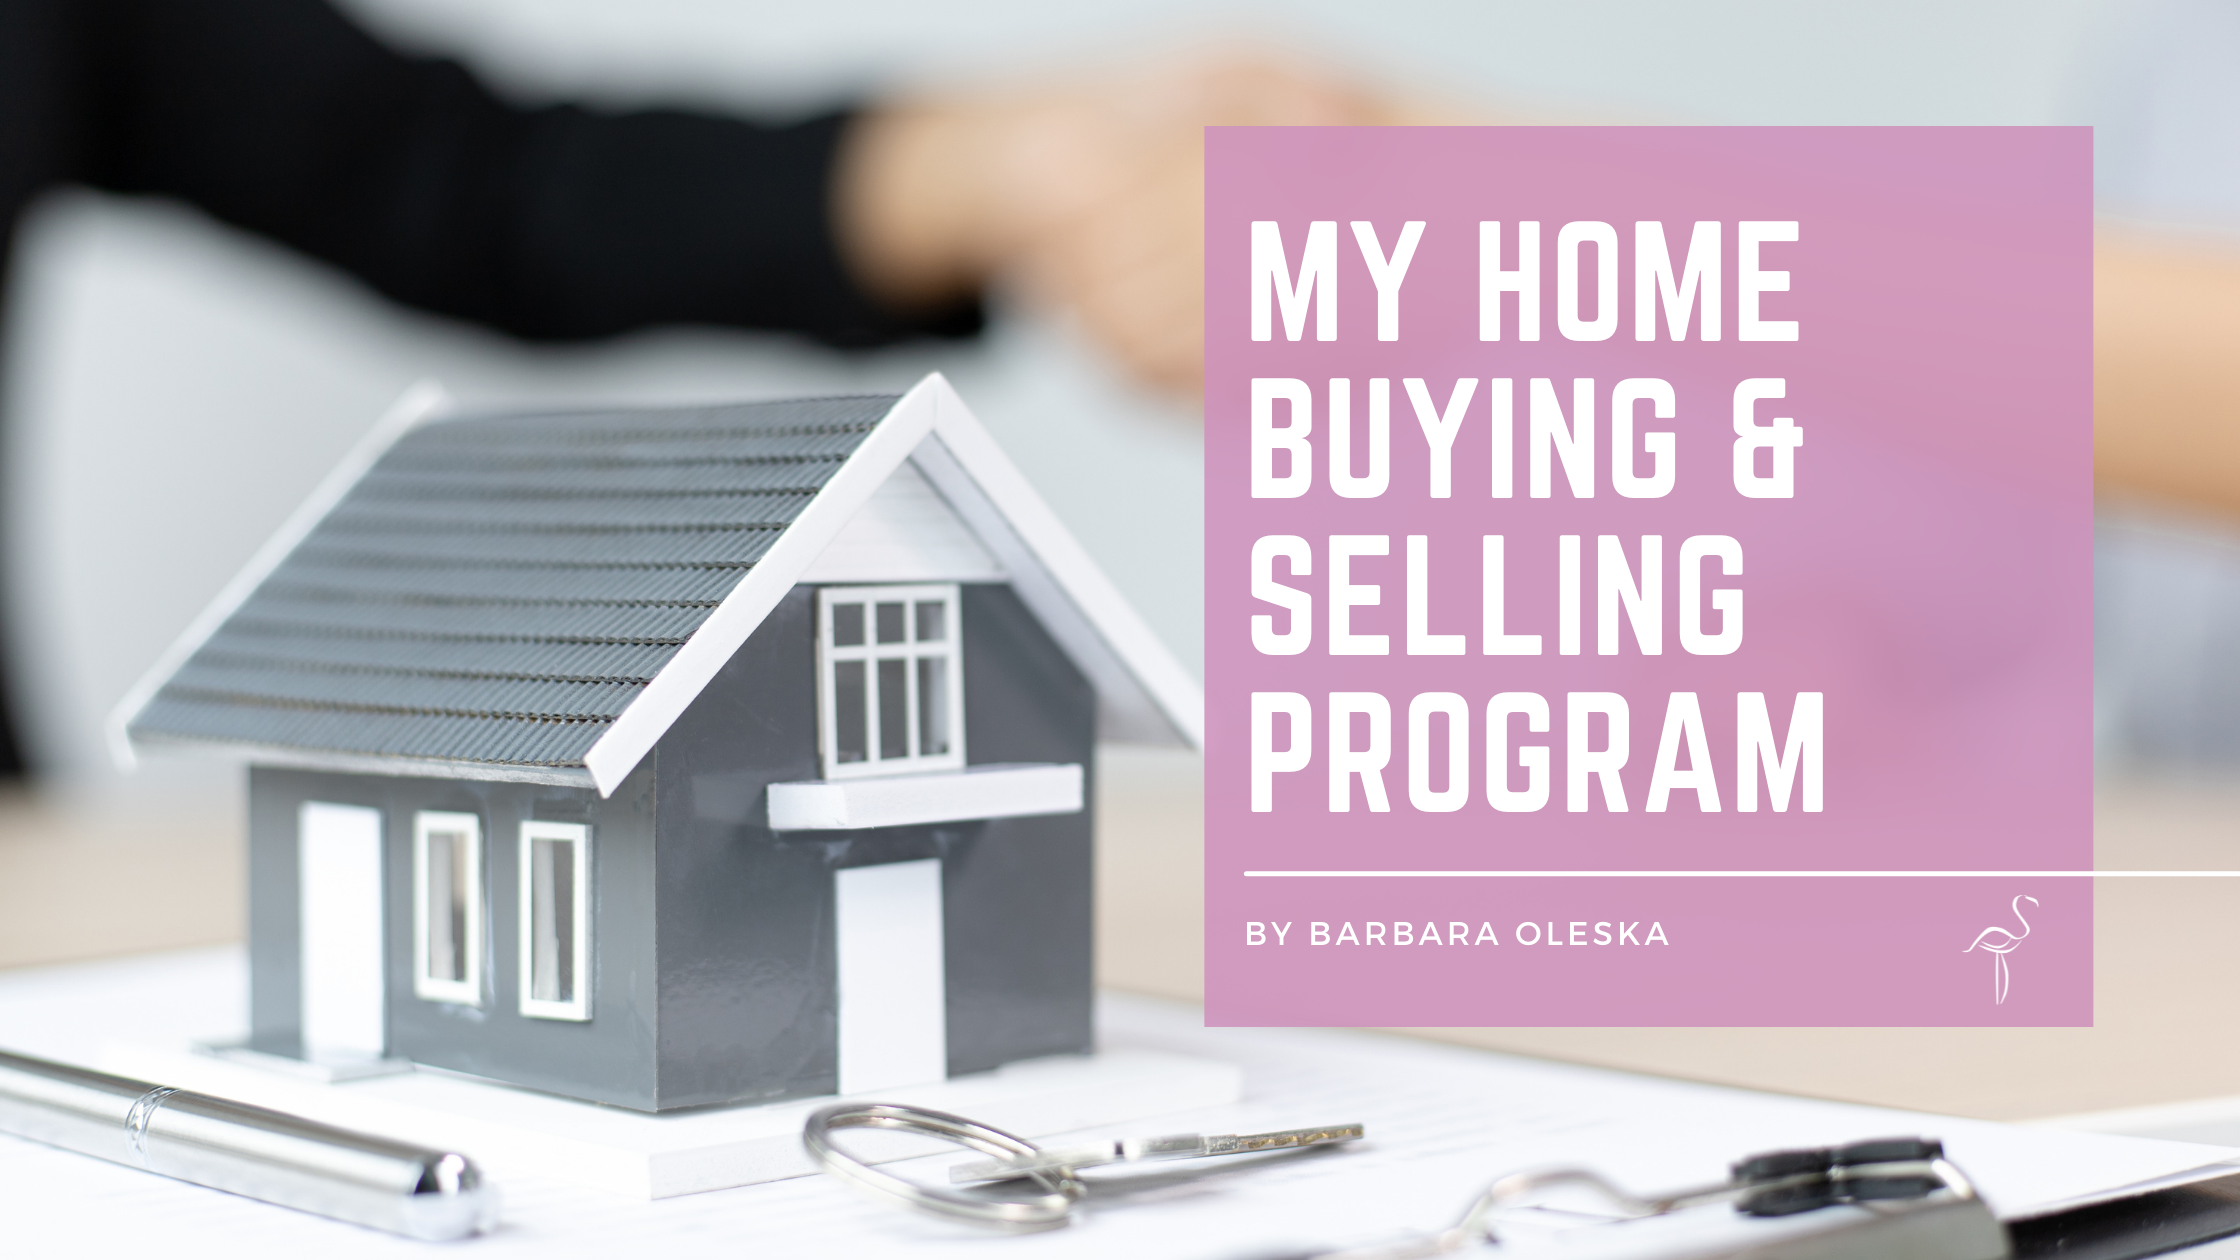 My Home Buying & Selling Program